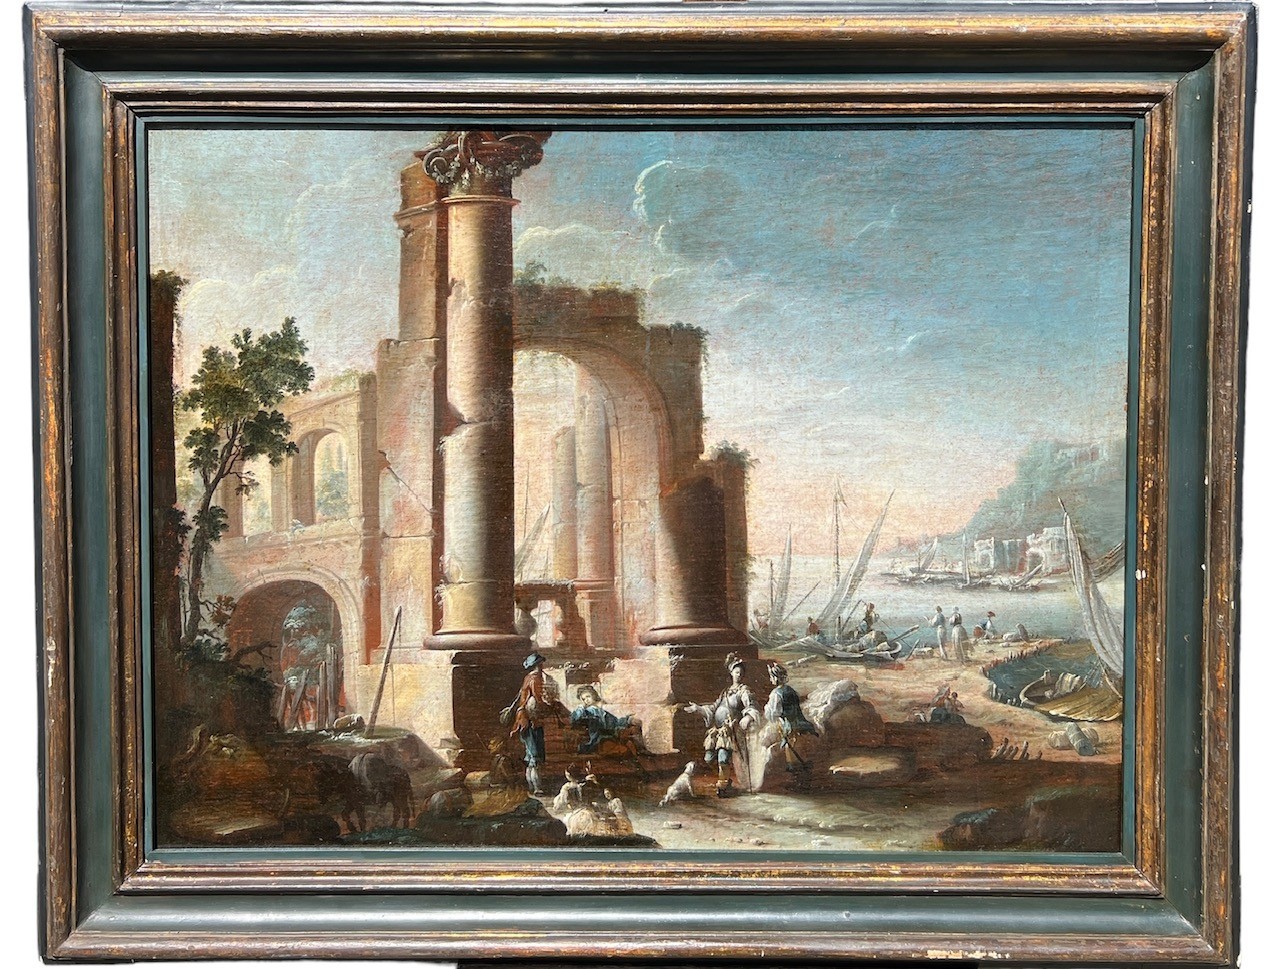 A LARGE 18TH CENTURY OIL ON CANVAS, ITALIAN RUINS, HARBOUR SCENE, FIGURES AND SOLDIERS Held in - Image 2 of 4